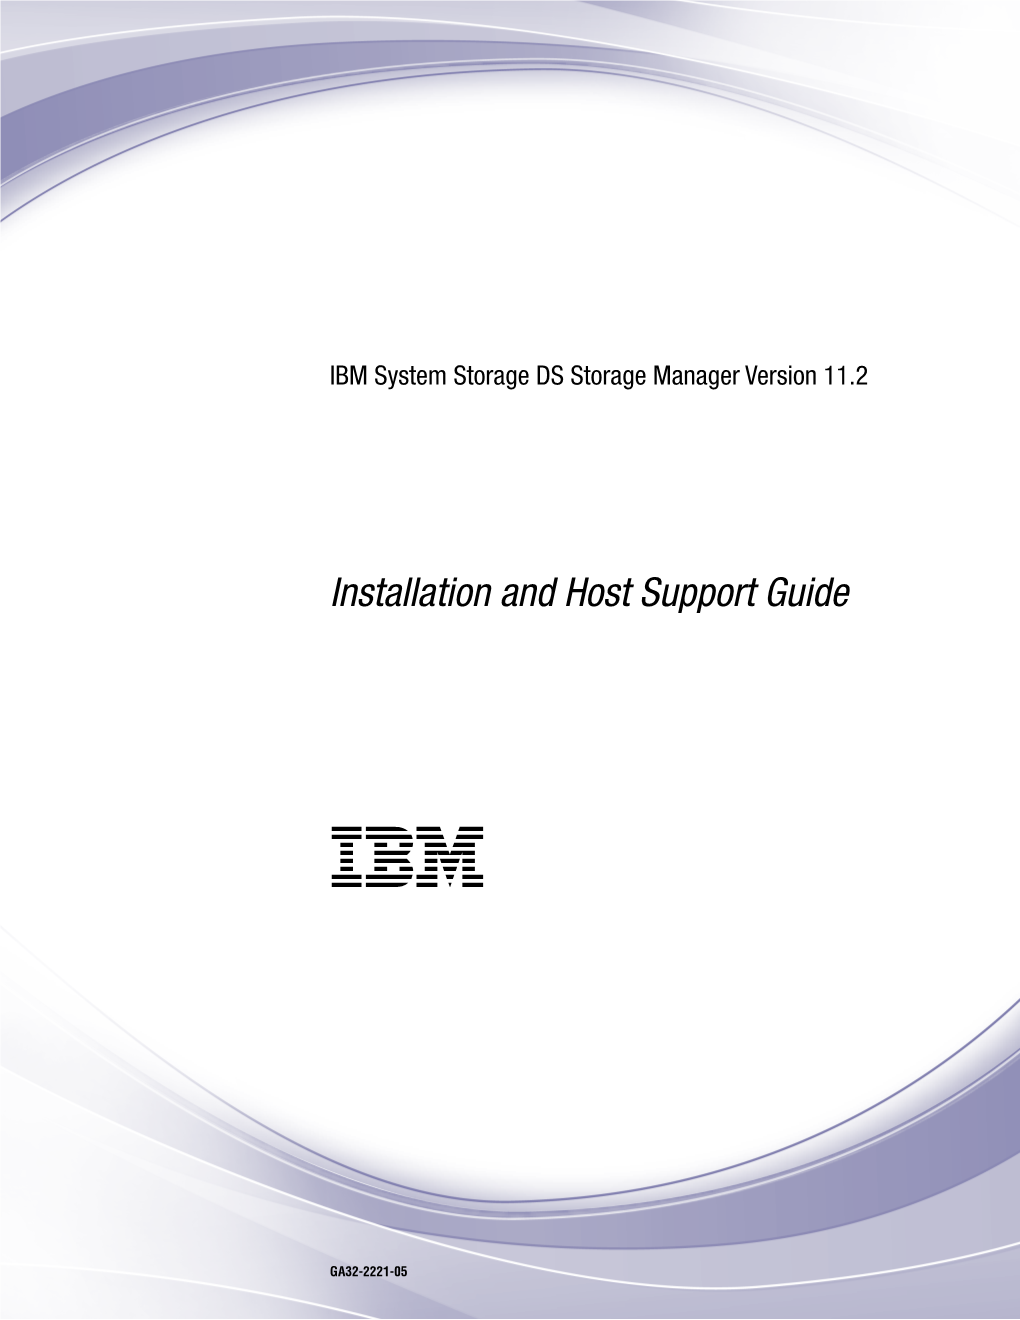 IBM System Storage DS Storage Manager Version 11.2: Installation and Host Support Guide DDC MEL Events